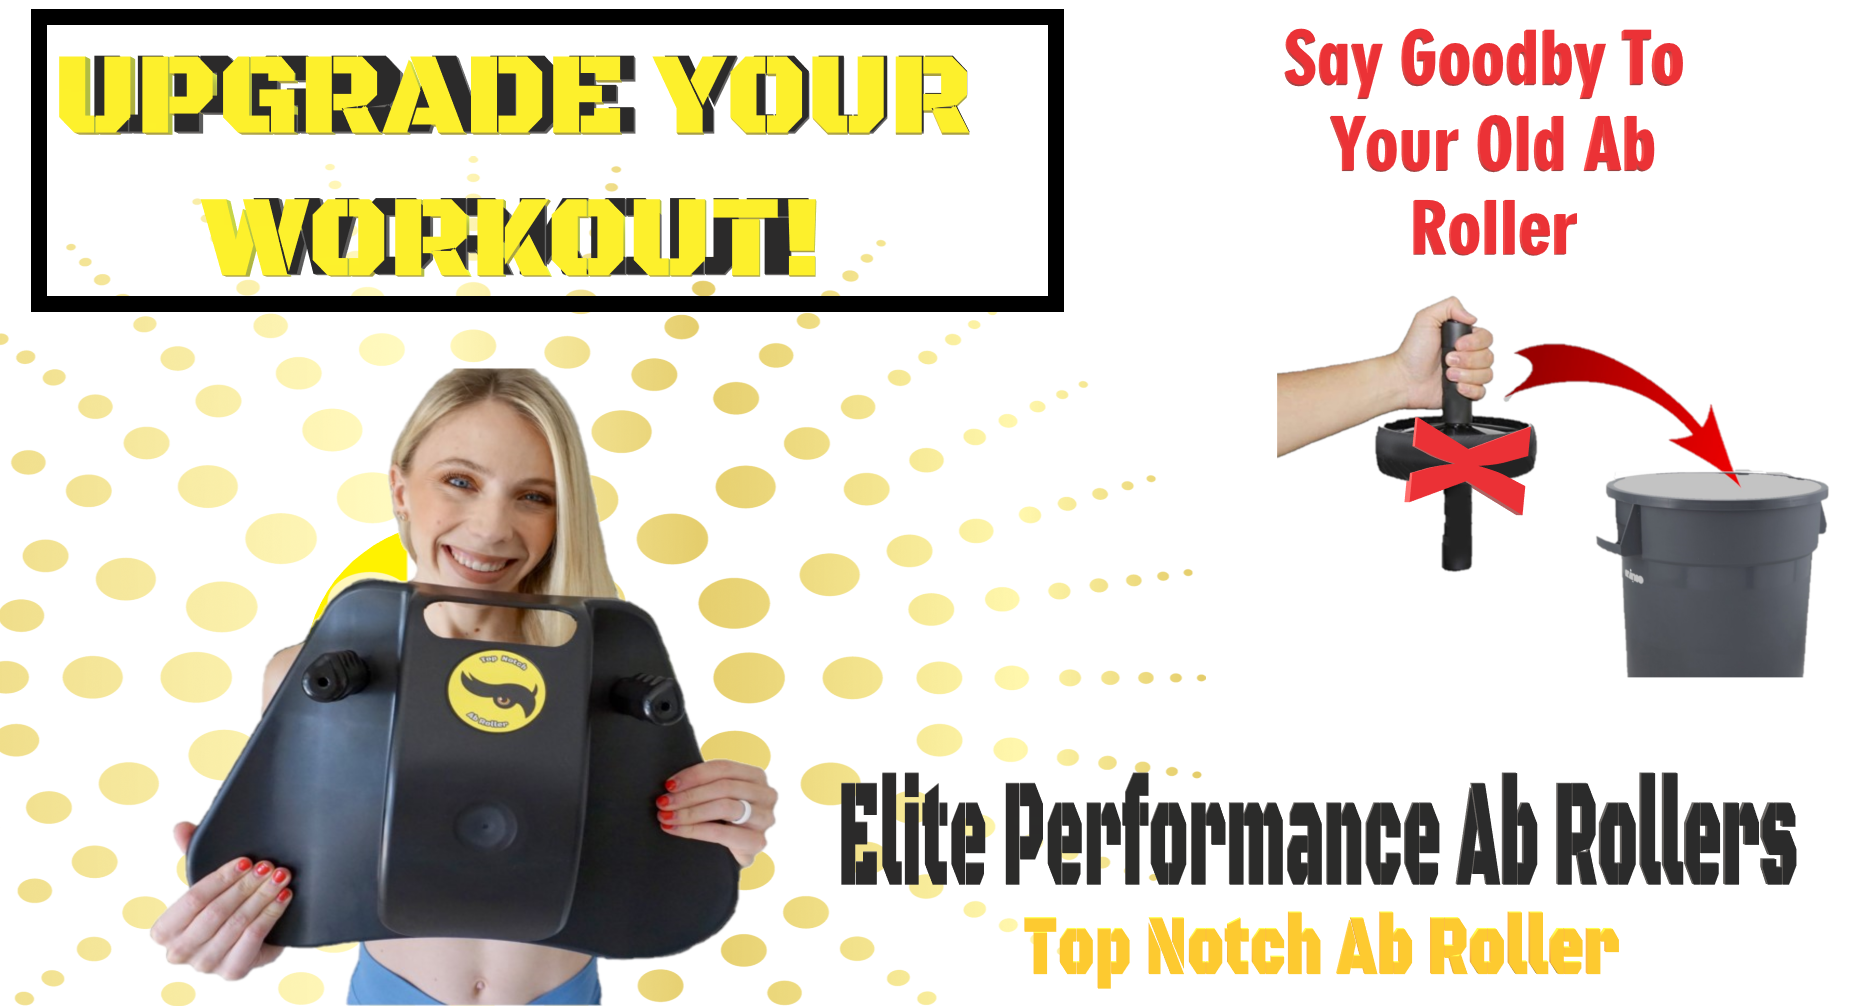 Top Notch Ab Roller by Mad Owl Fitness Elite Performance Ab Rollers